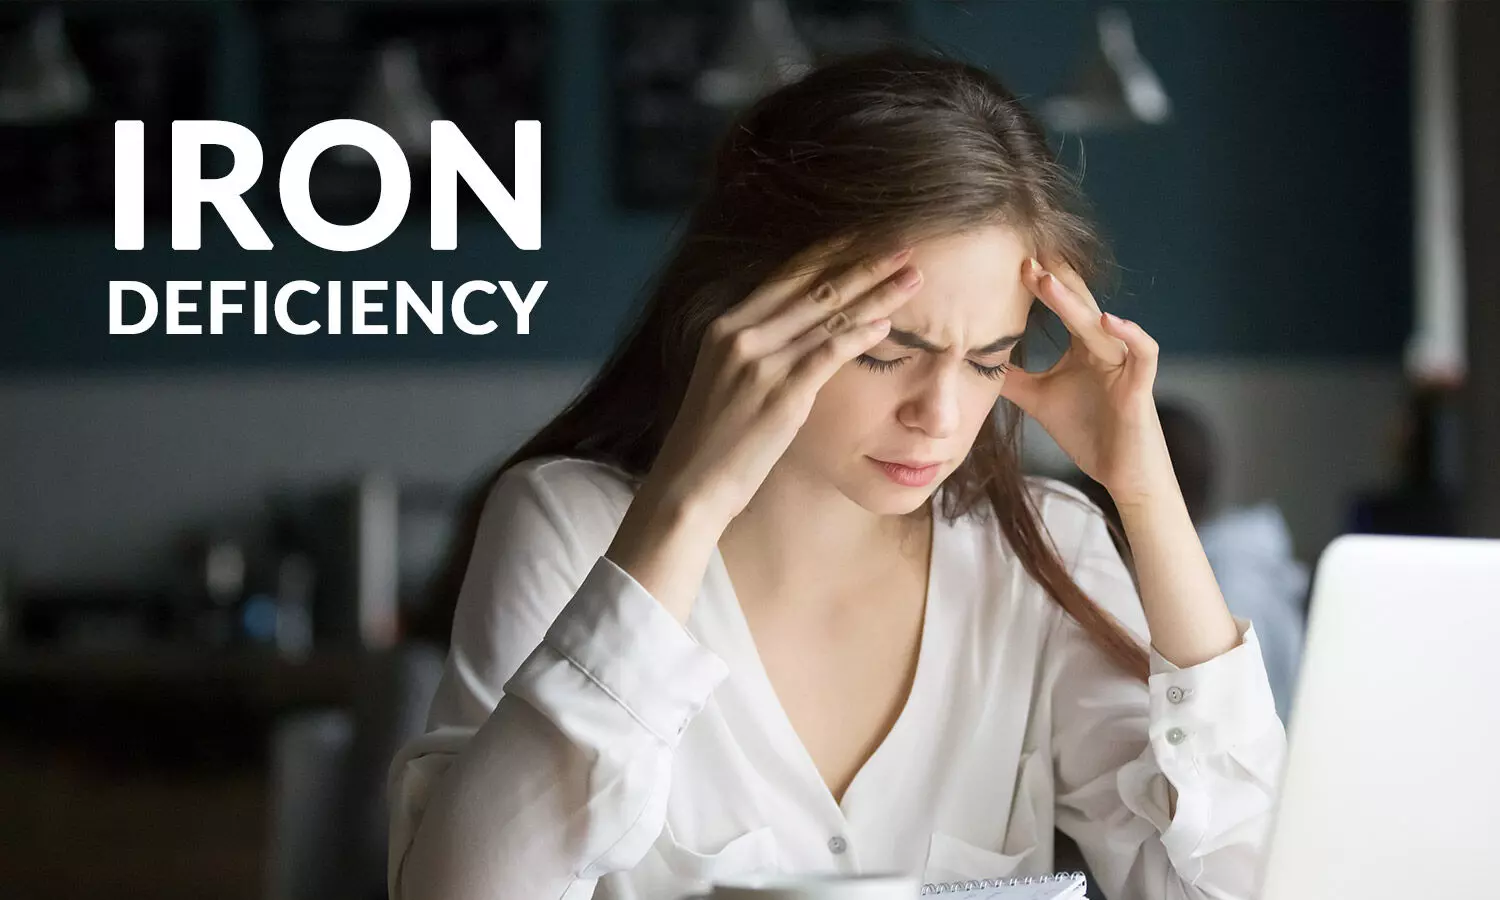 Iron Deficiency in Women: 5 Essential Tips to Boost Iron Levels